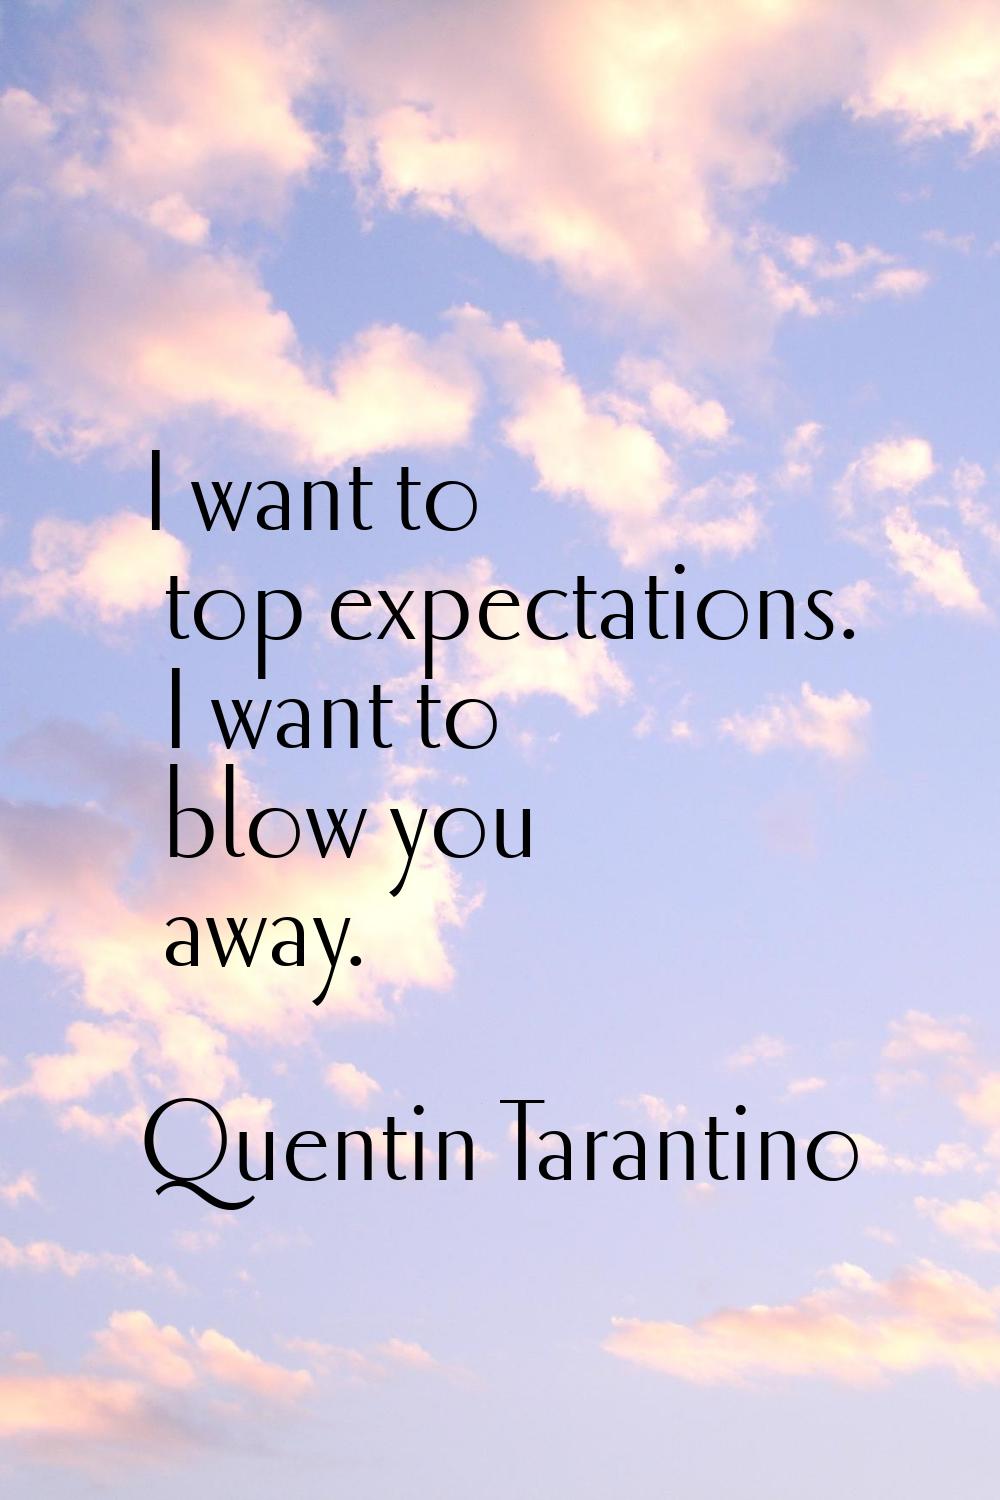 I want to top expectations. I want to blow you away.